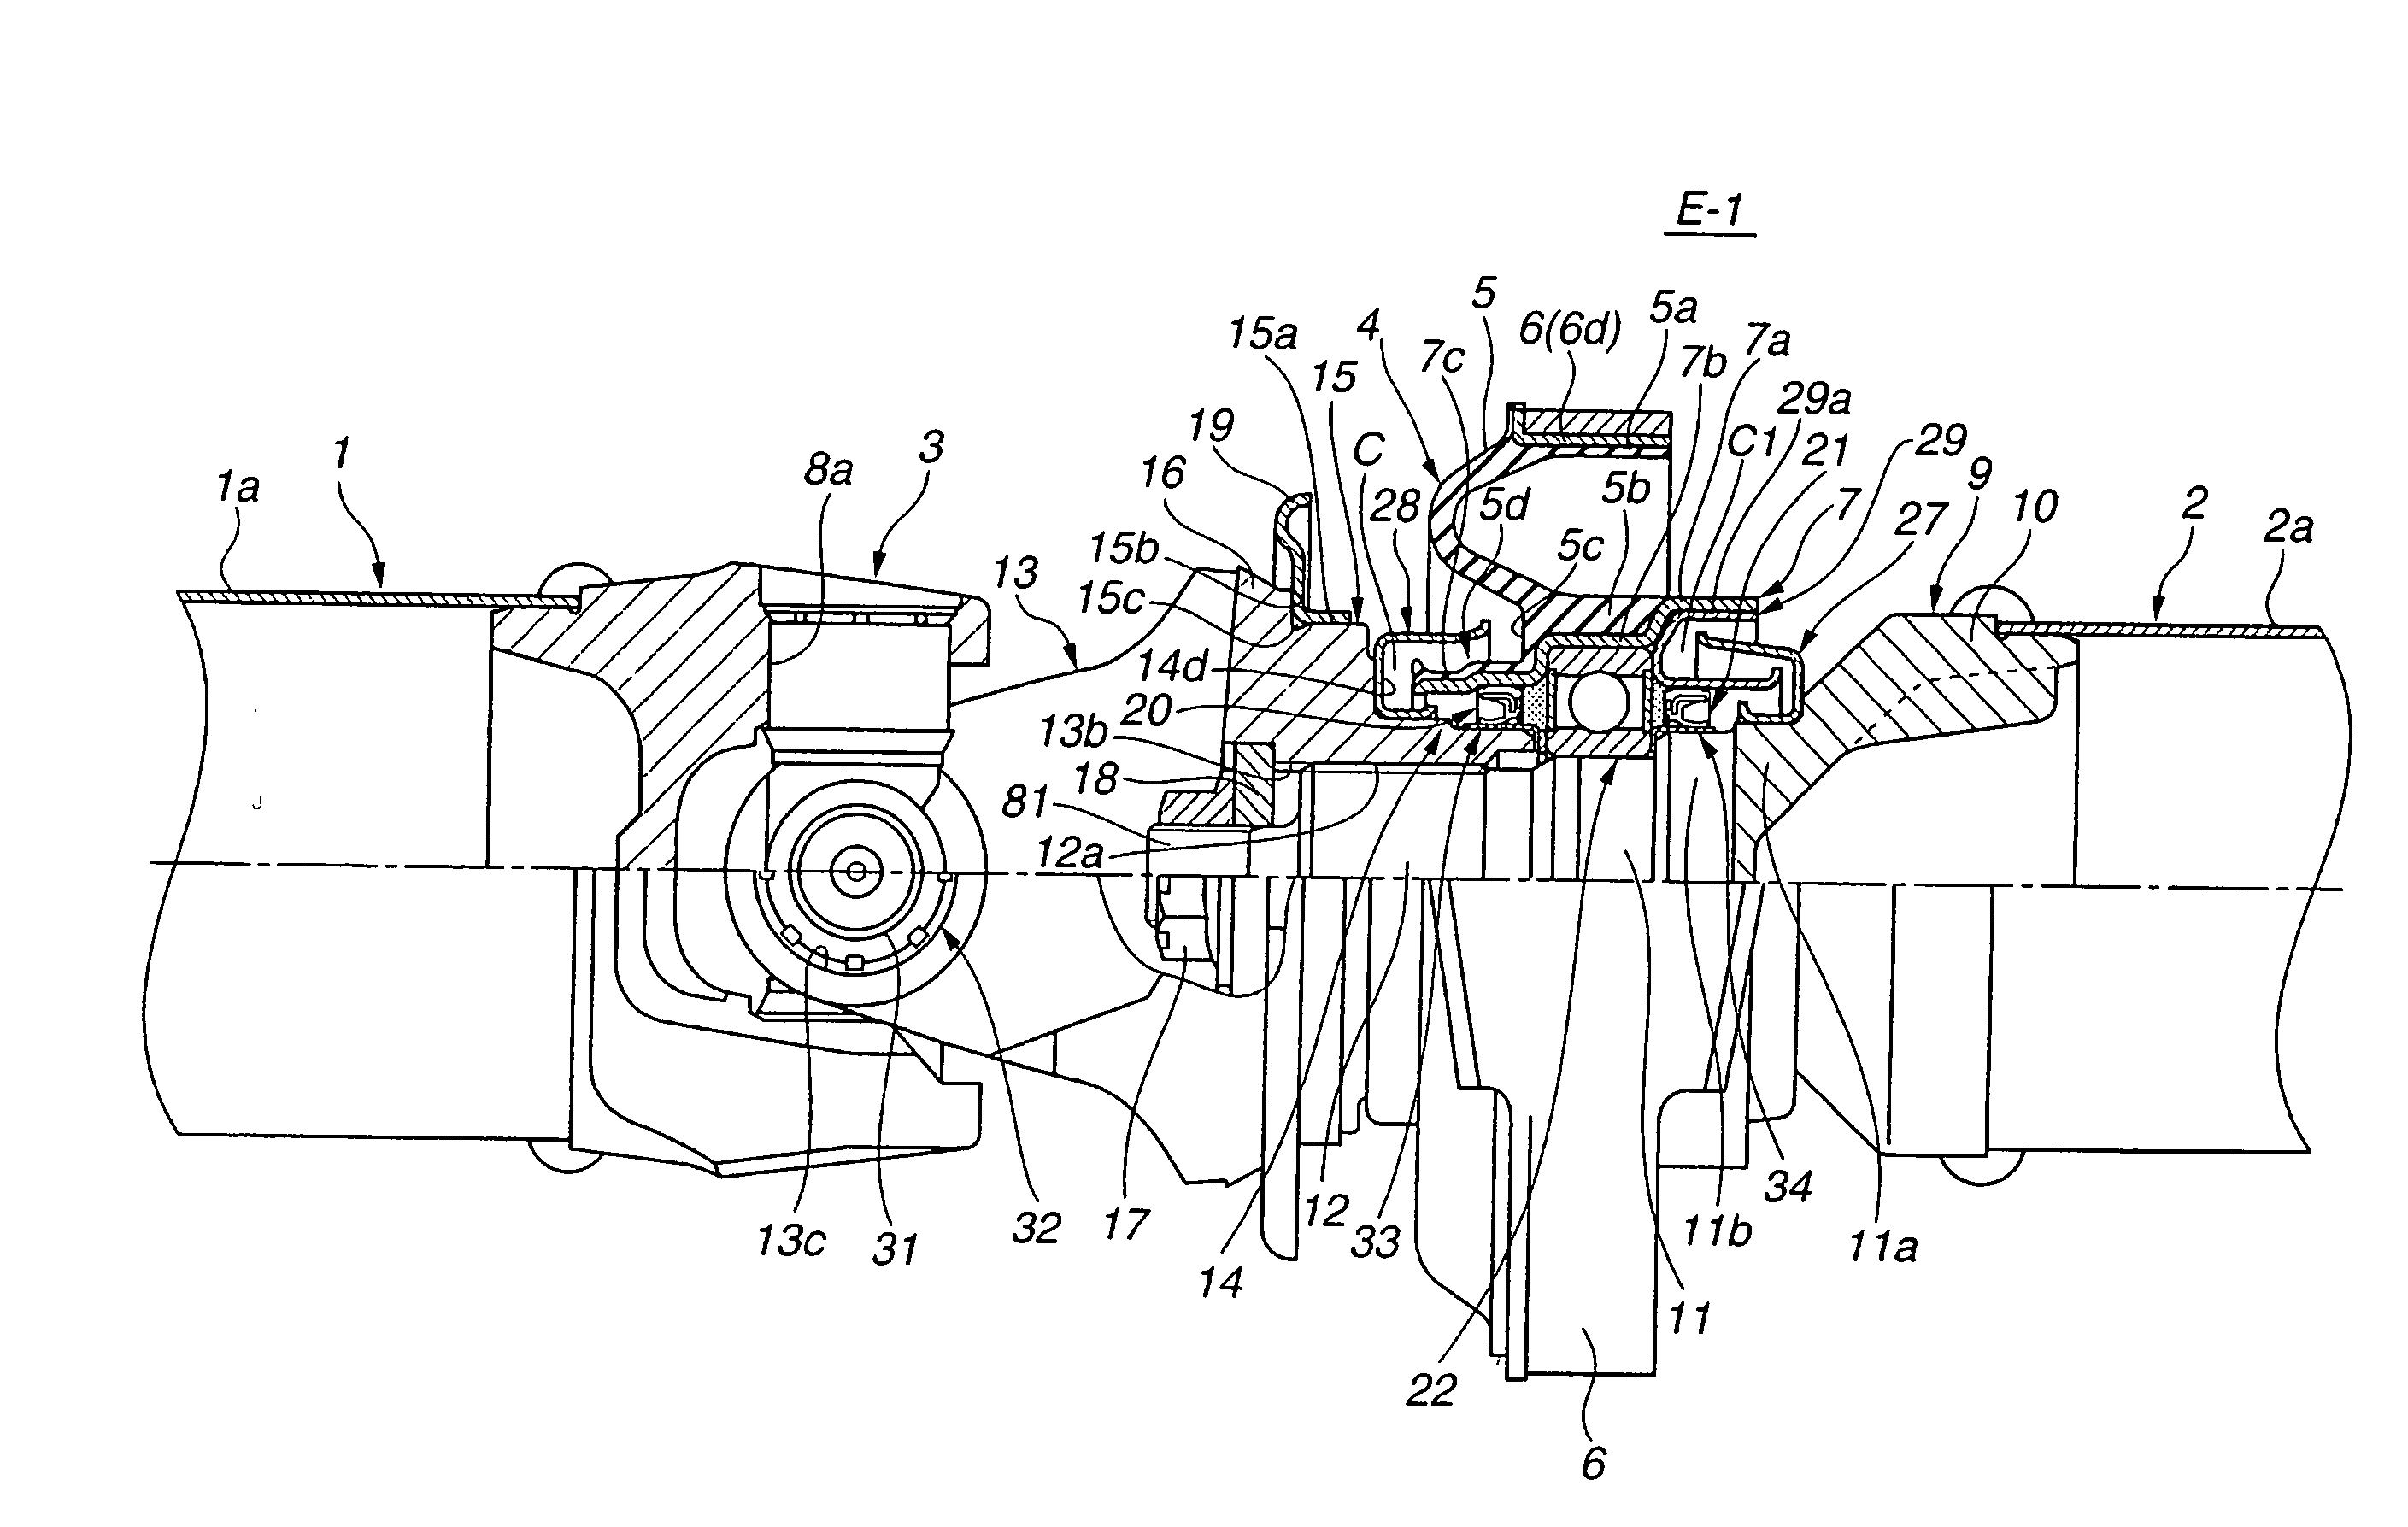 Support device for supporting propeller shaft and propeller shaft itself